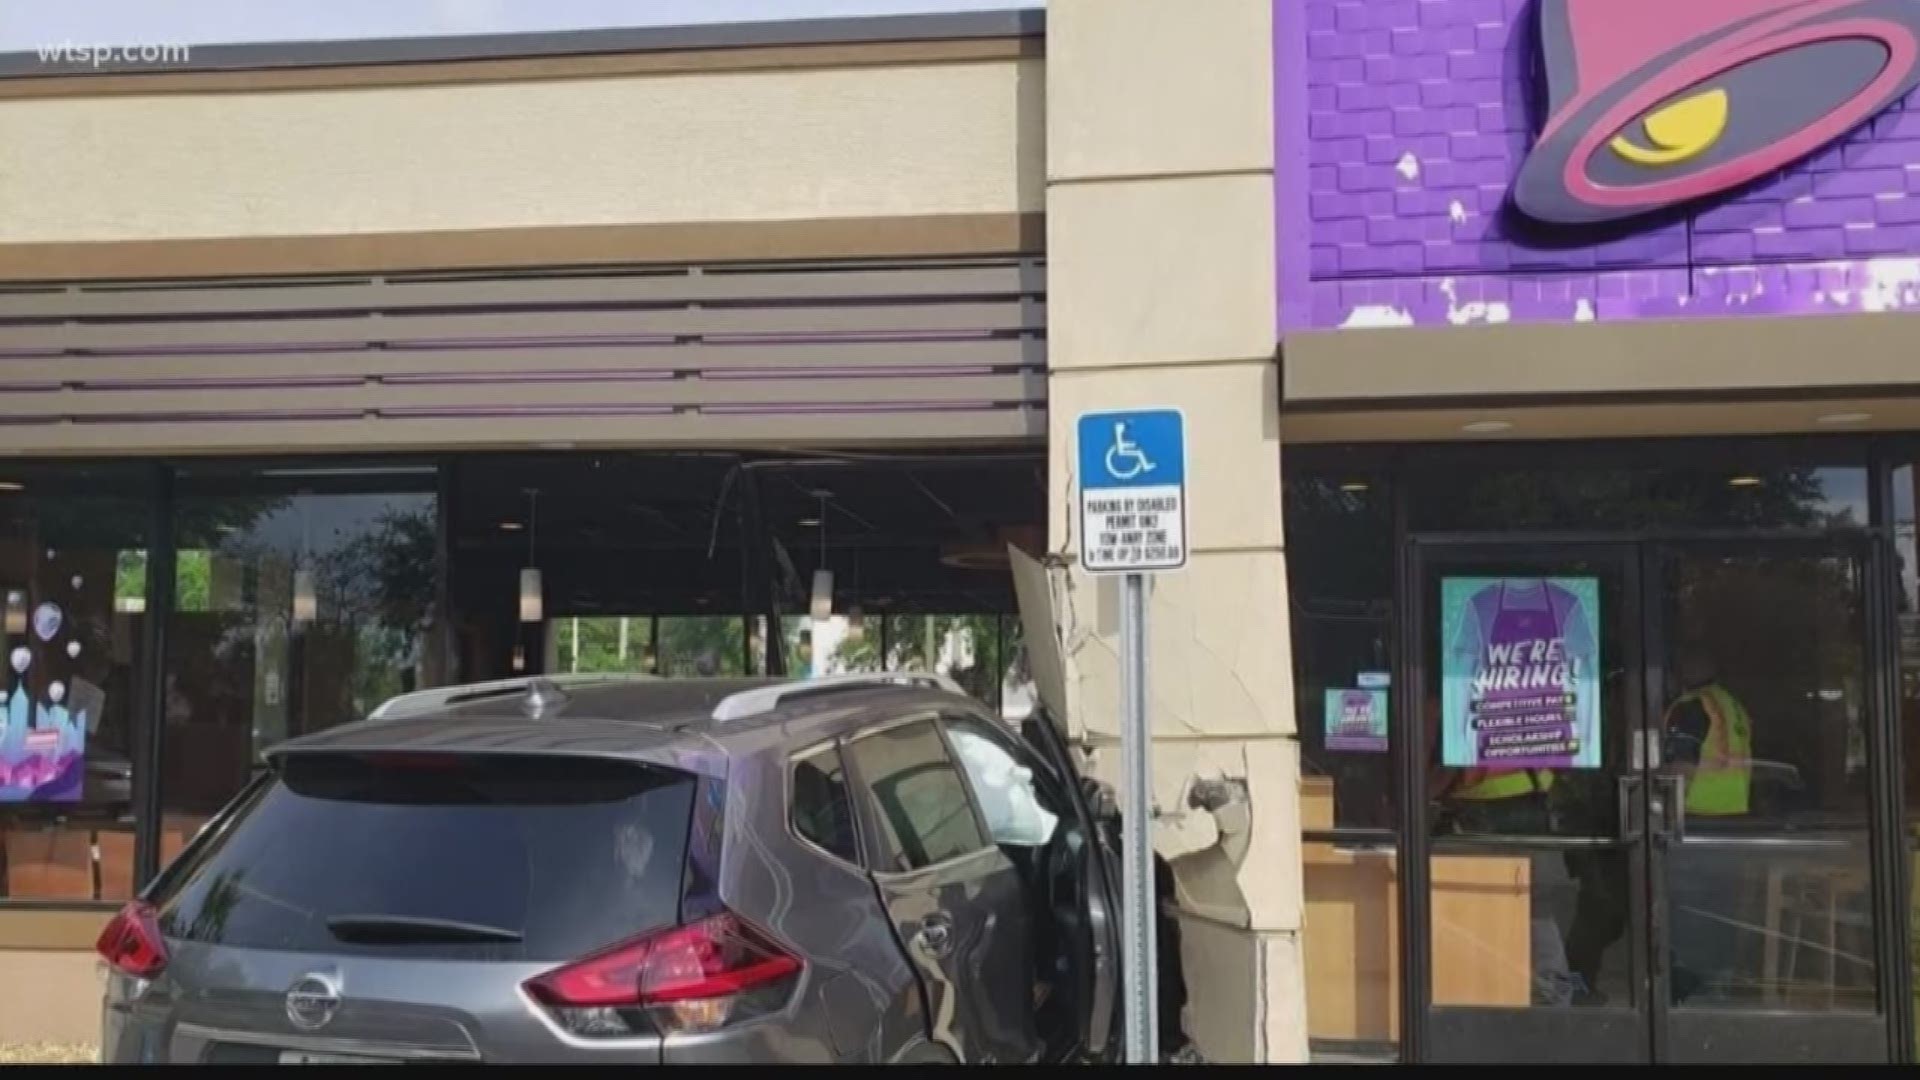 The need for hot sauce could be what came between one Taco Bell customer and a car that drove through the building, according to Winter Haven police.